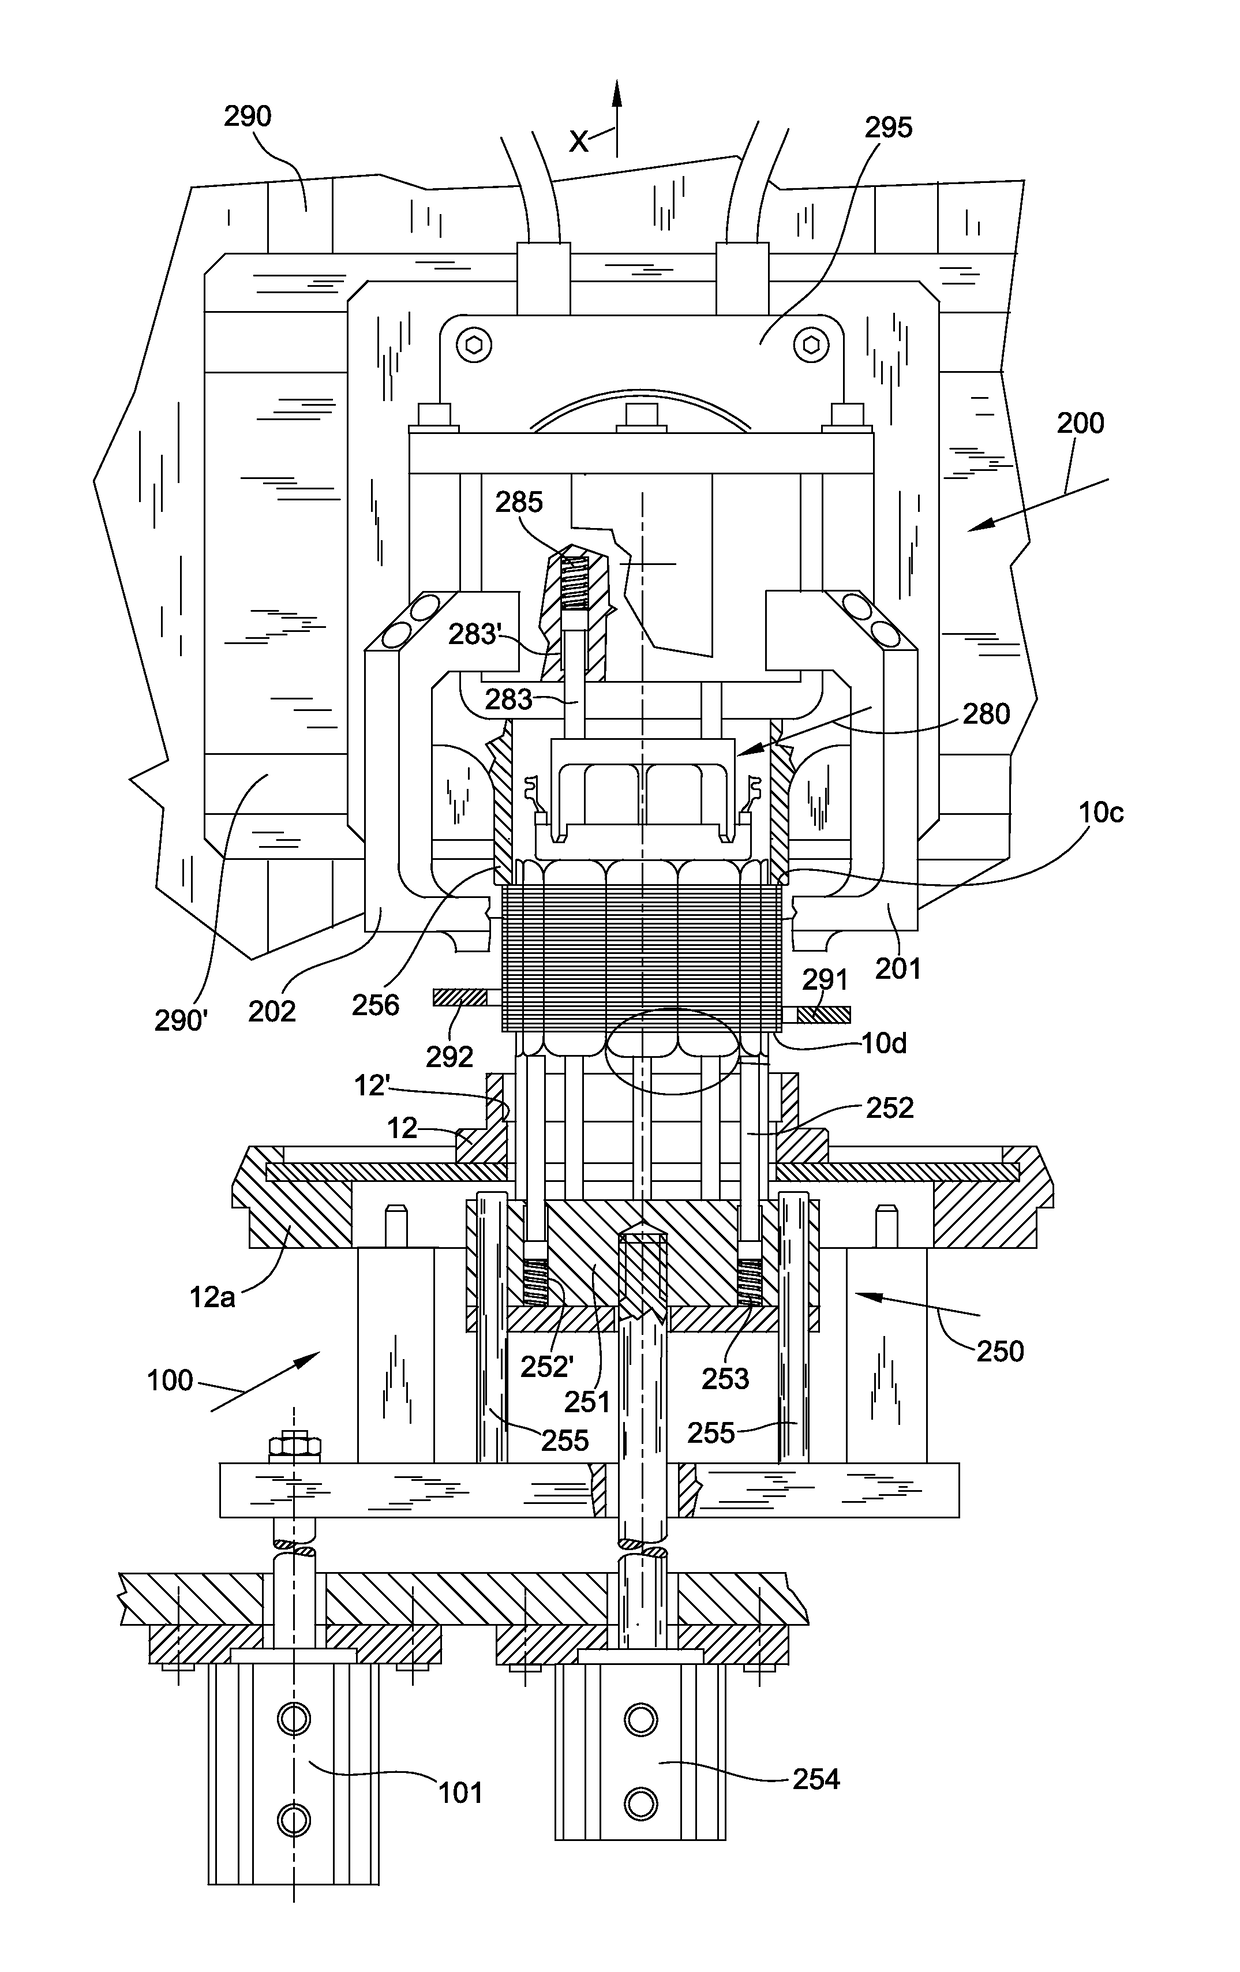 Apparatus for producing wound stators of dynamo electric machines formed from assembly of pole segments